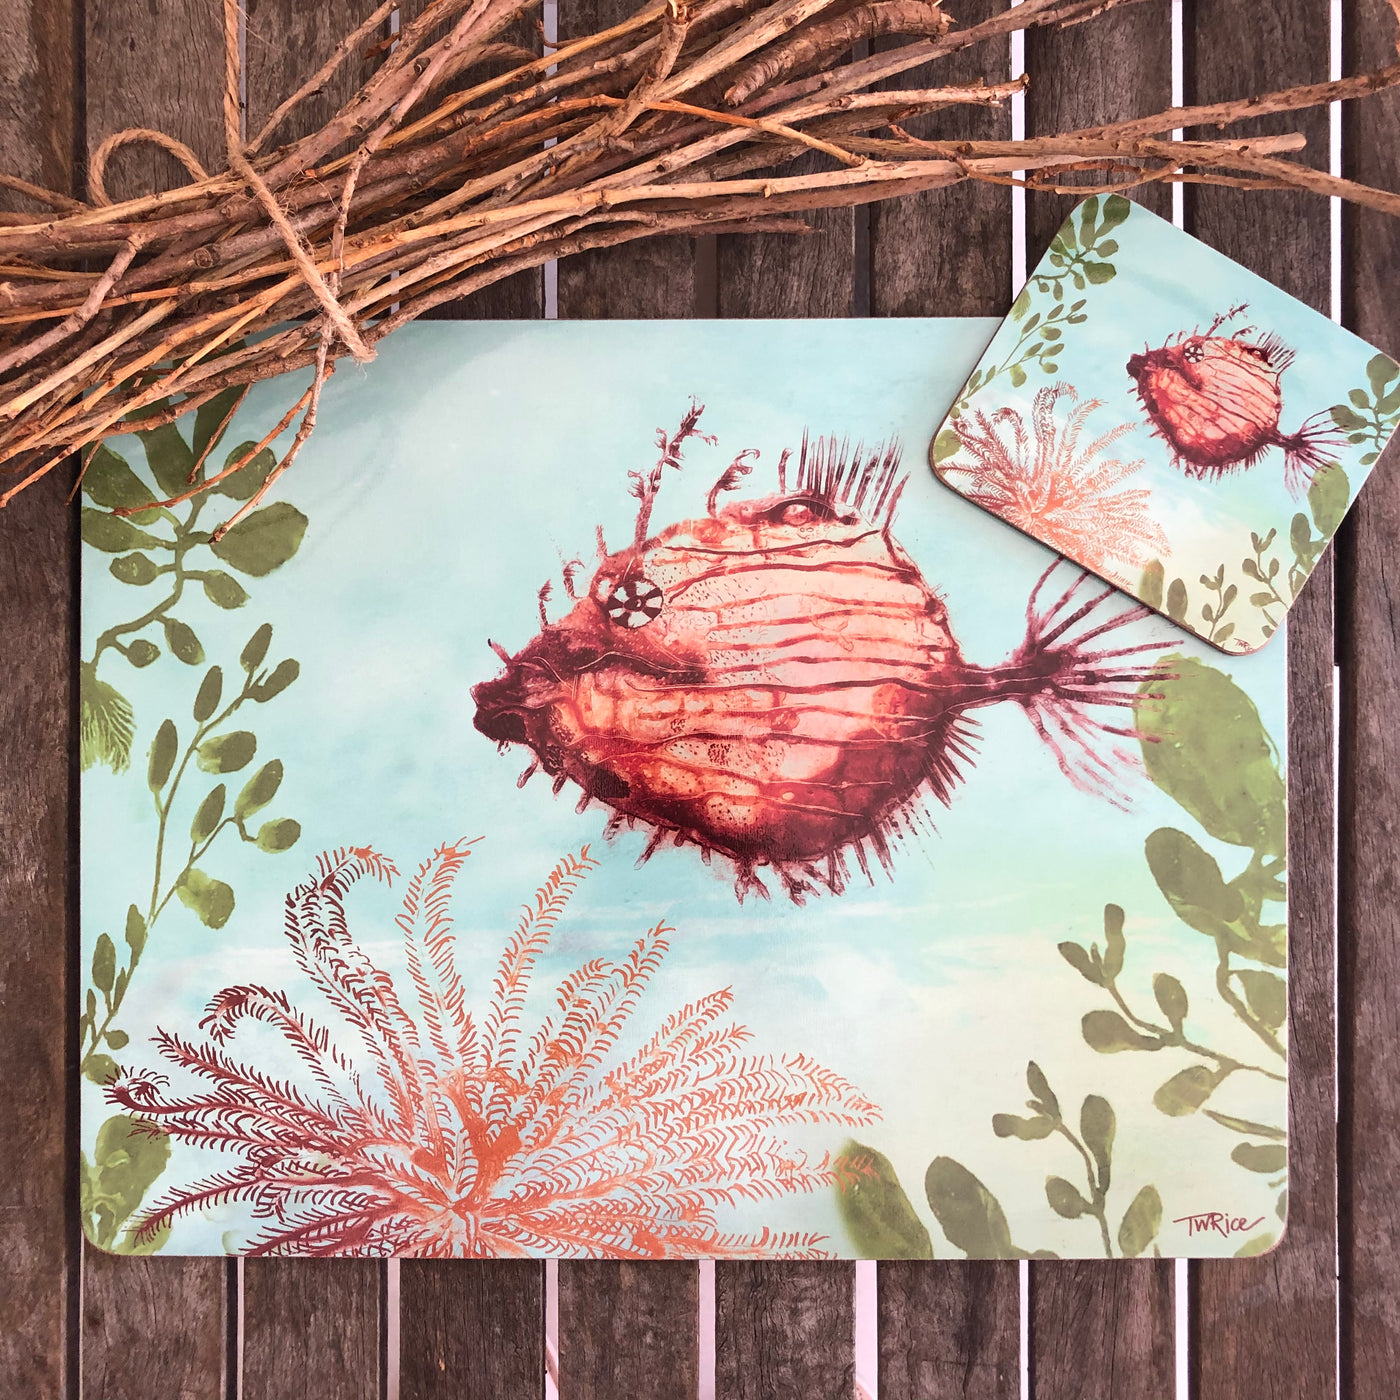 Oceanus-cork-backed-placemats-and-coasters-by-australian-artist-trudy-rice